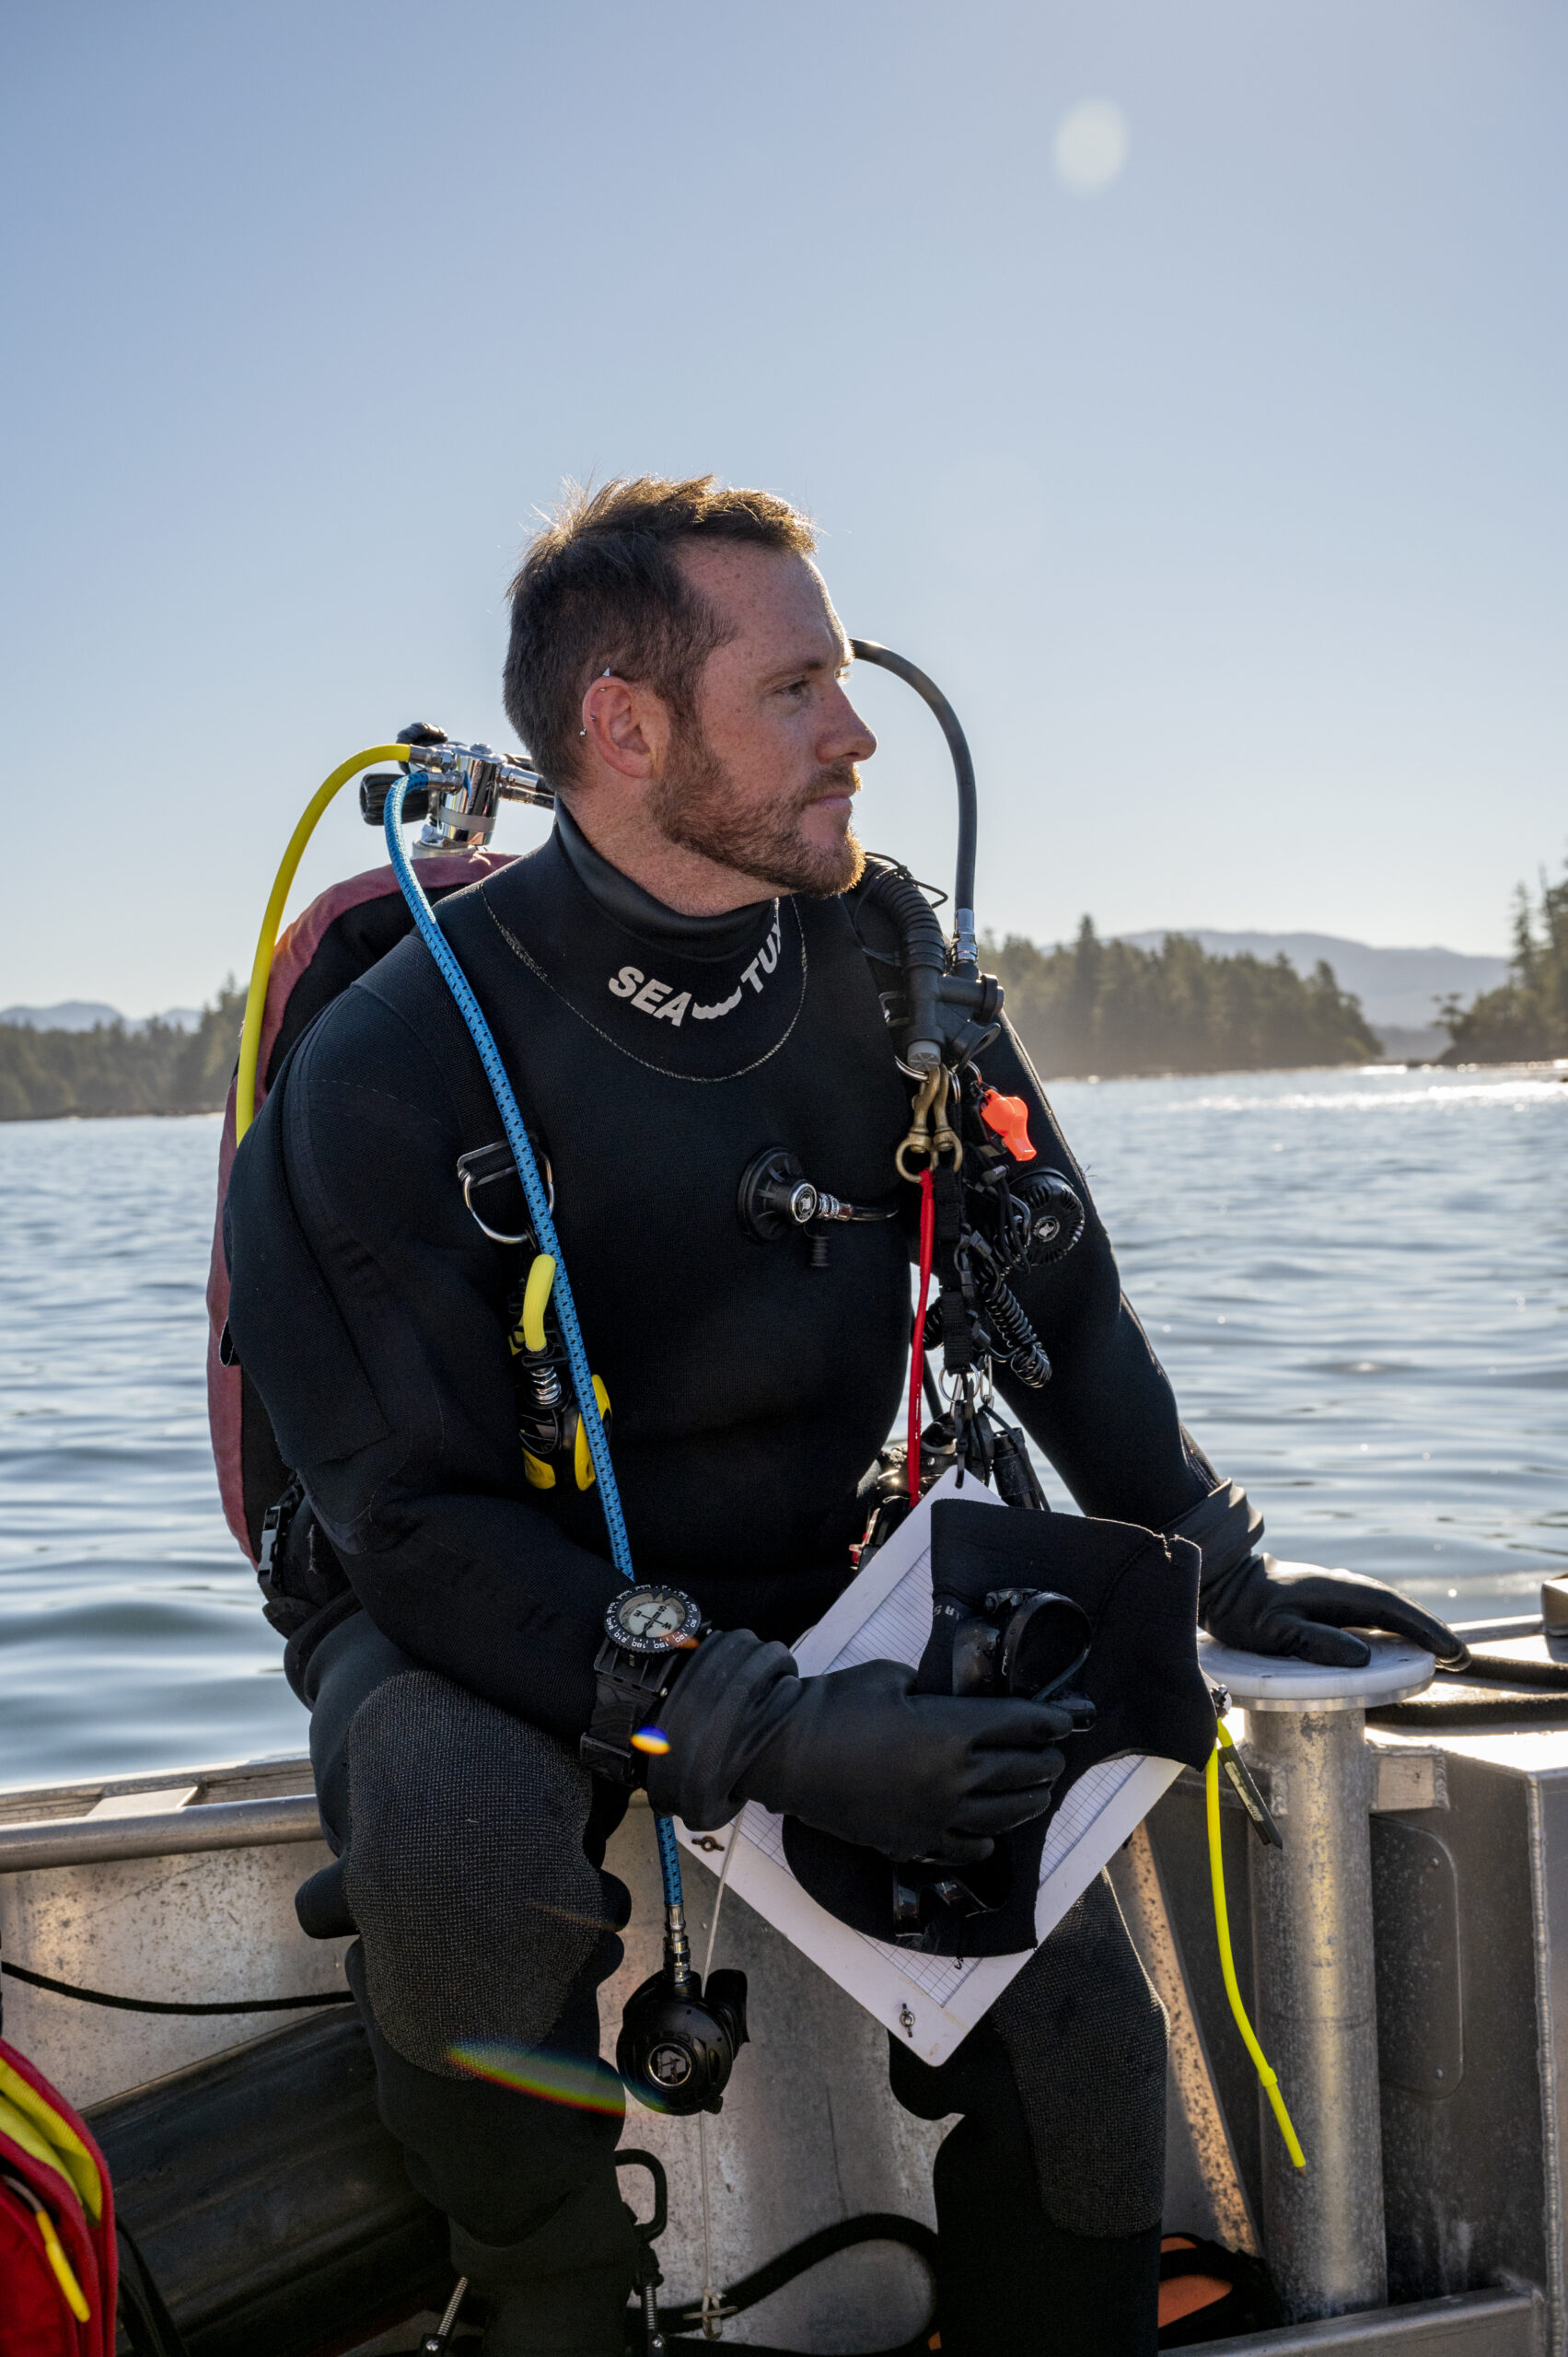 A portrait of marine ecologist Kieran Cox in his dry suit, sitting on the side of his research boat with the ocean and trees in the background